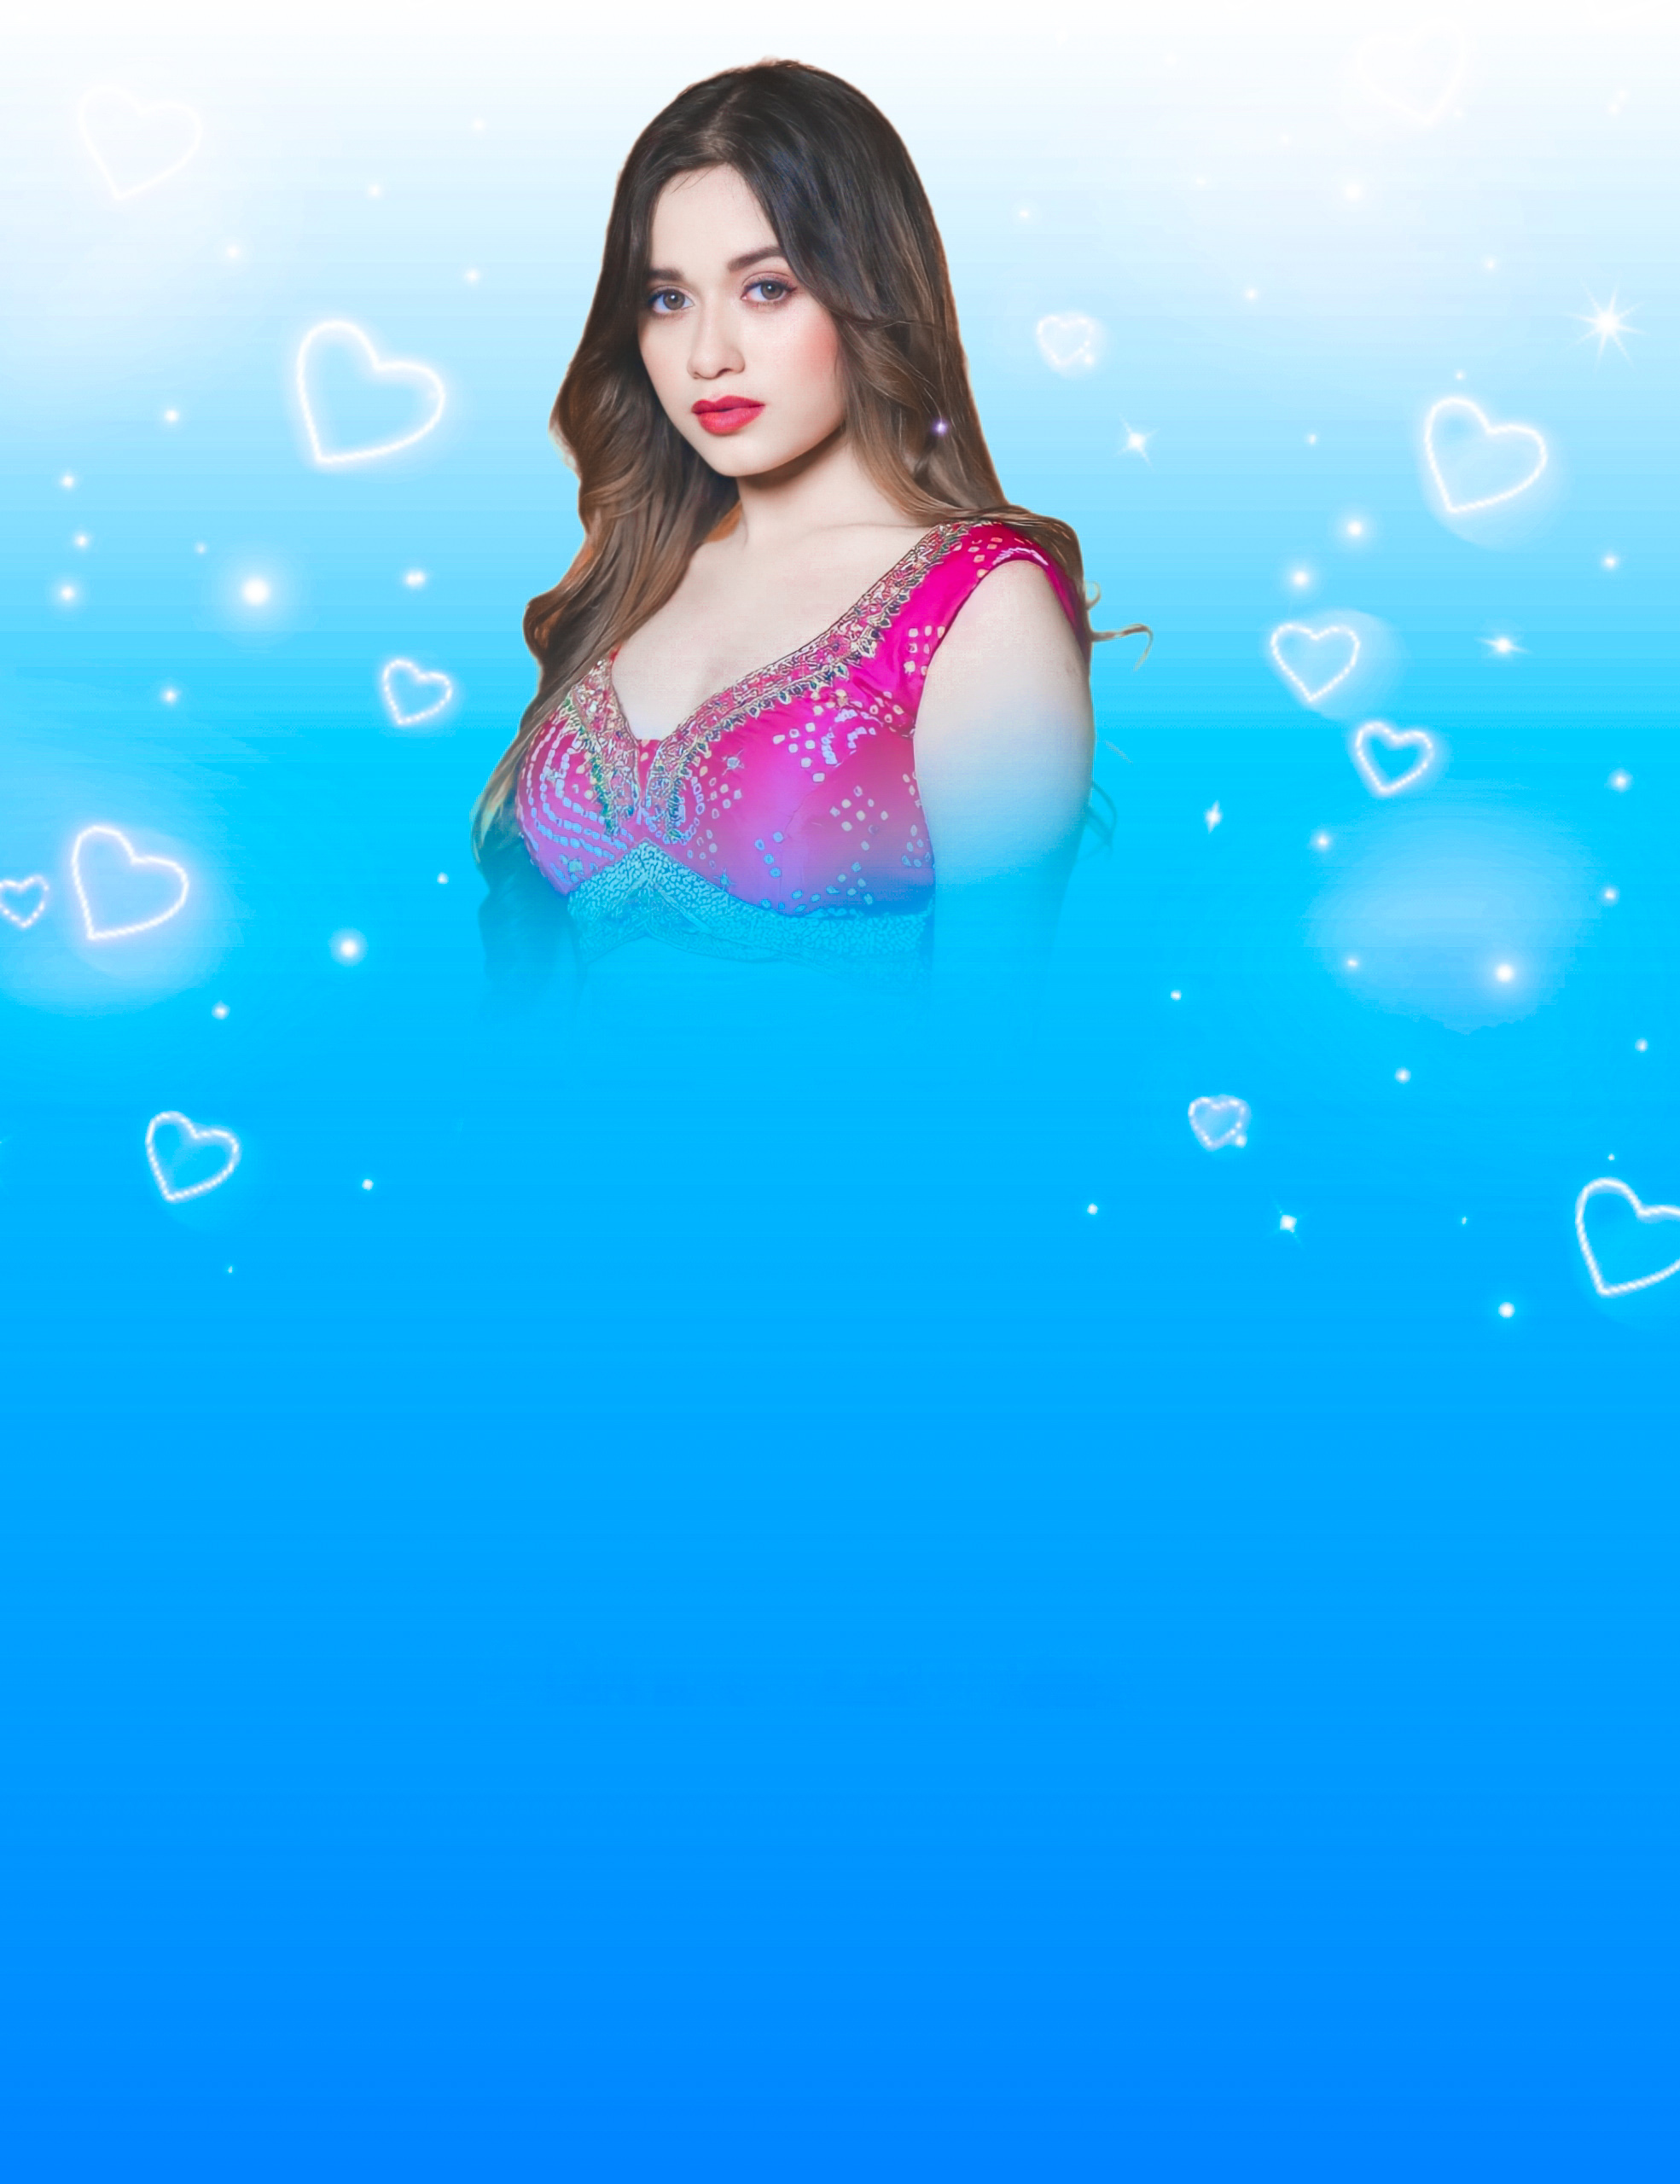 Girl CB Background HD Quality Image For PicsArt Editing 